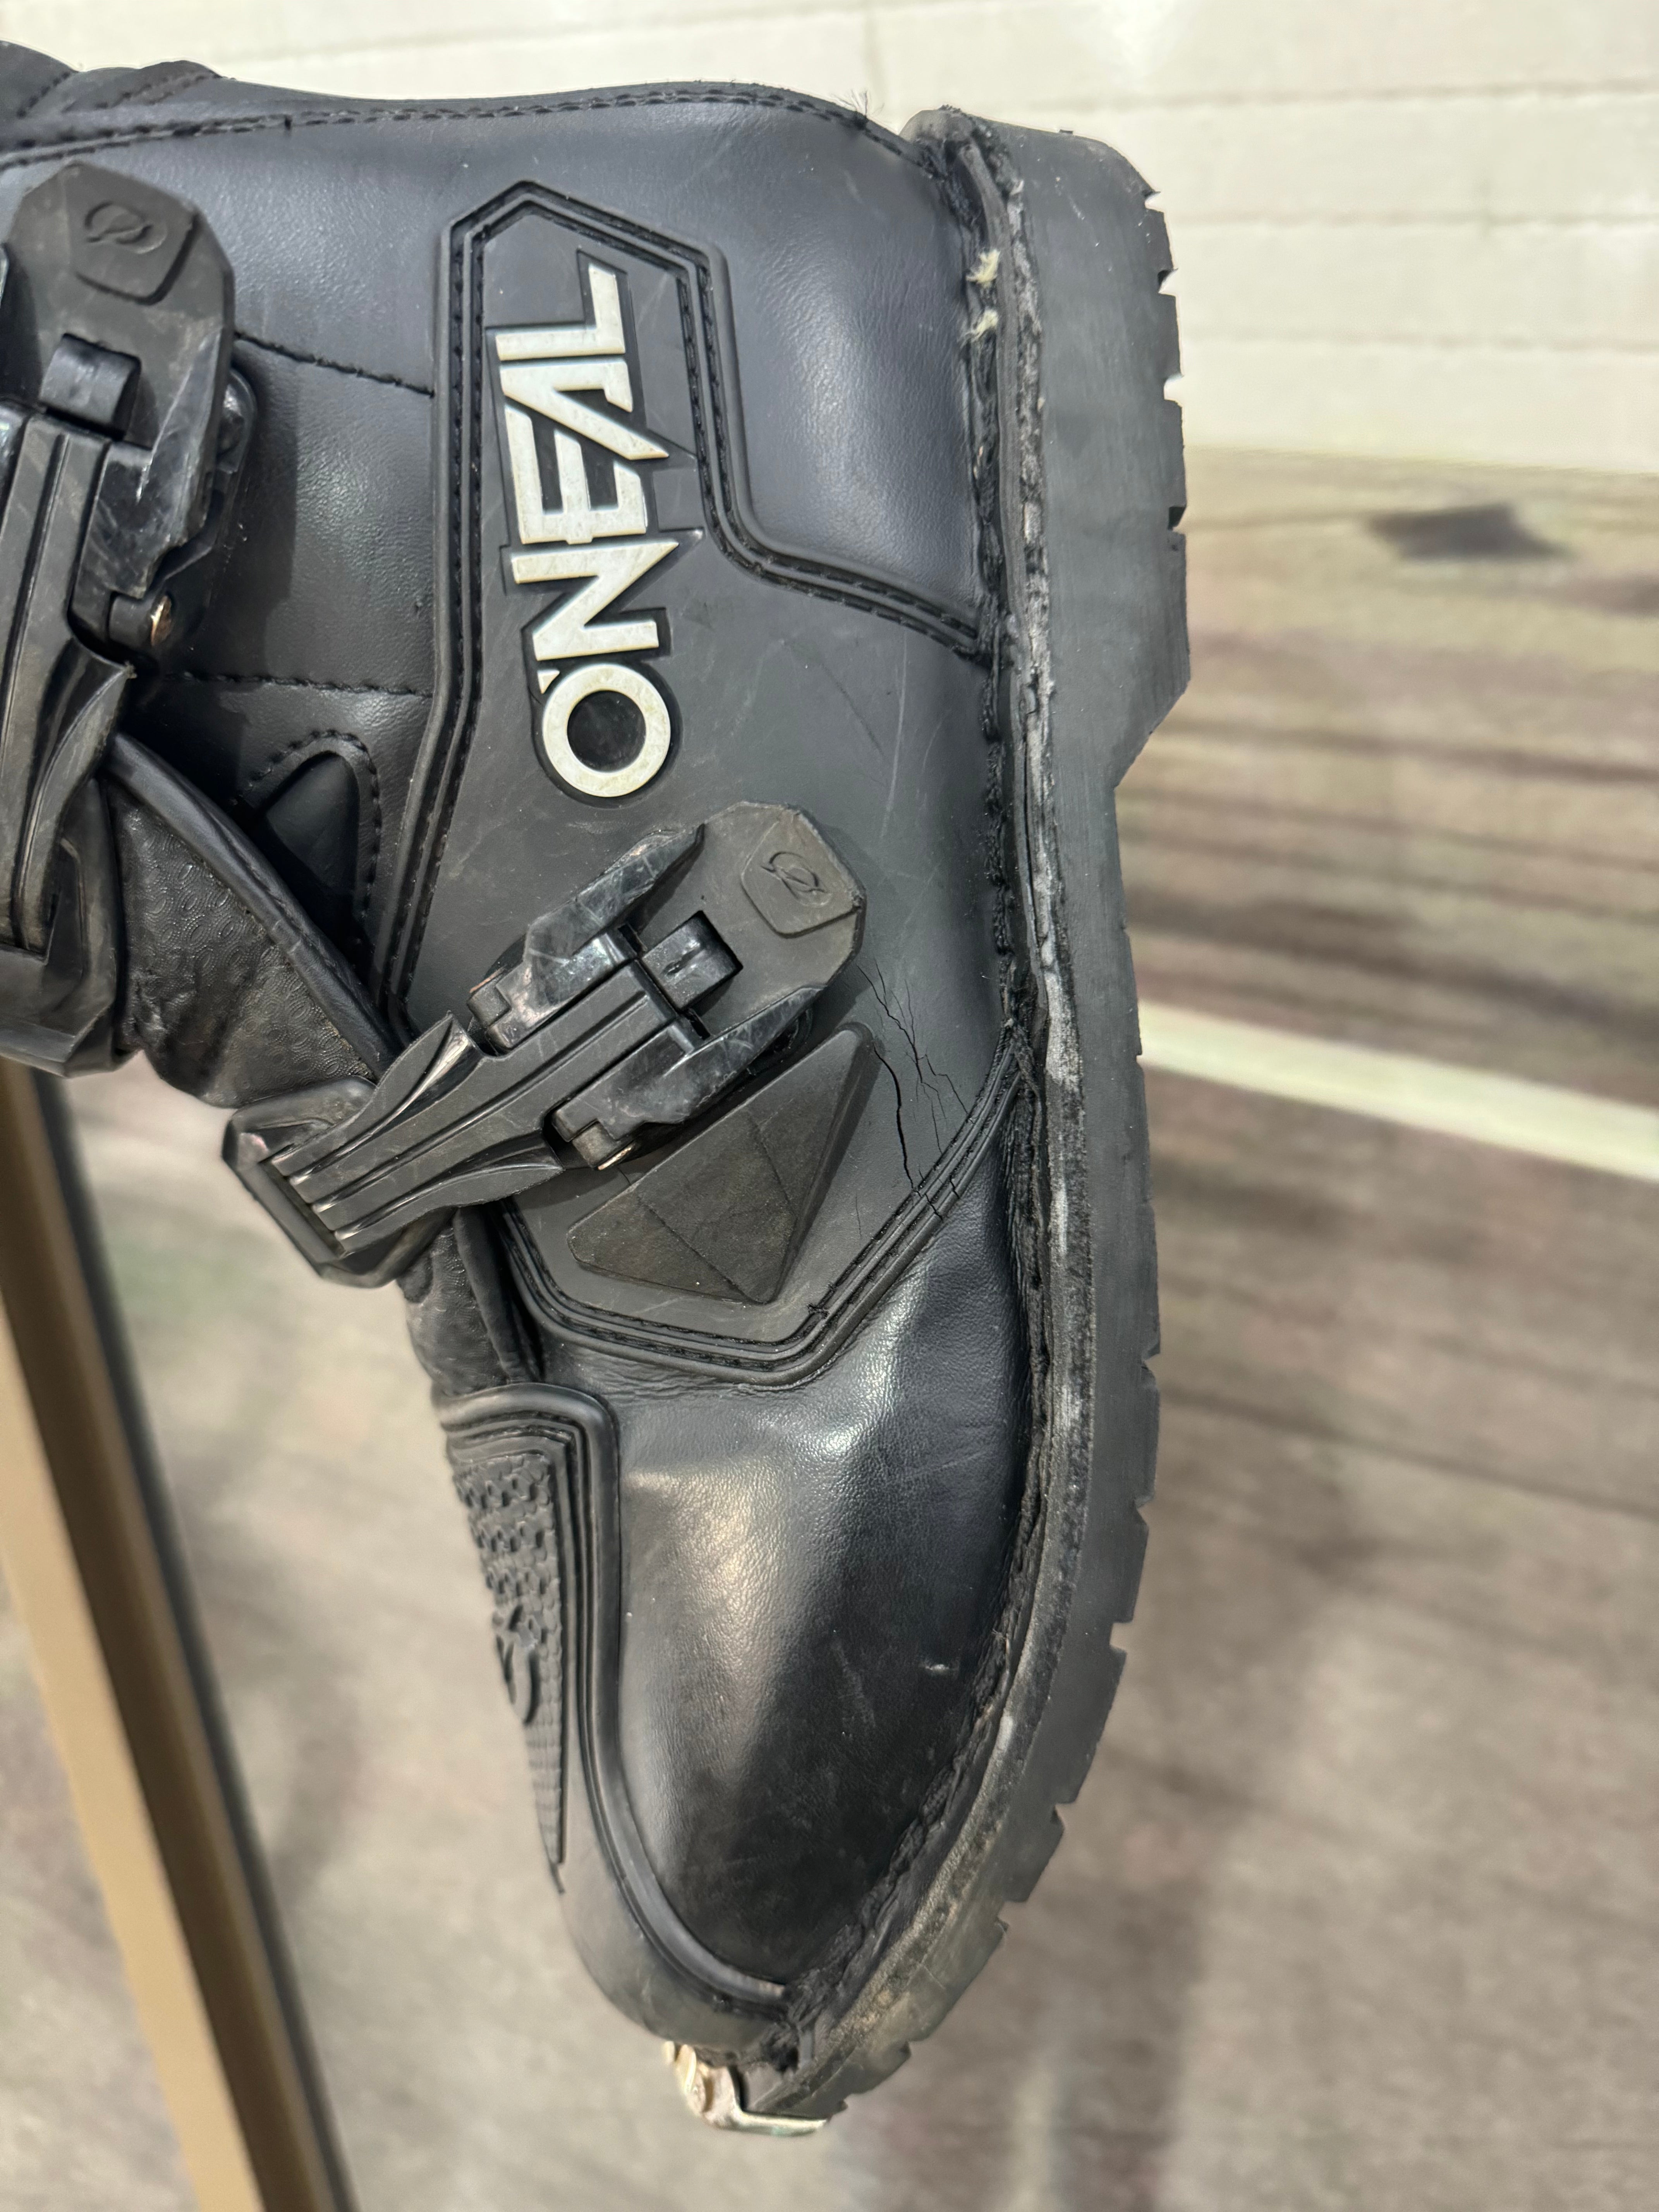 Pre-Loved (USED) O'Neal Rider Black/Black Boots (UK 8)